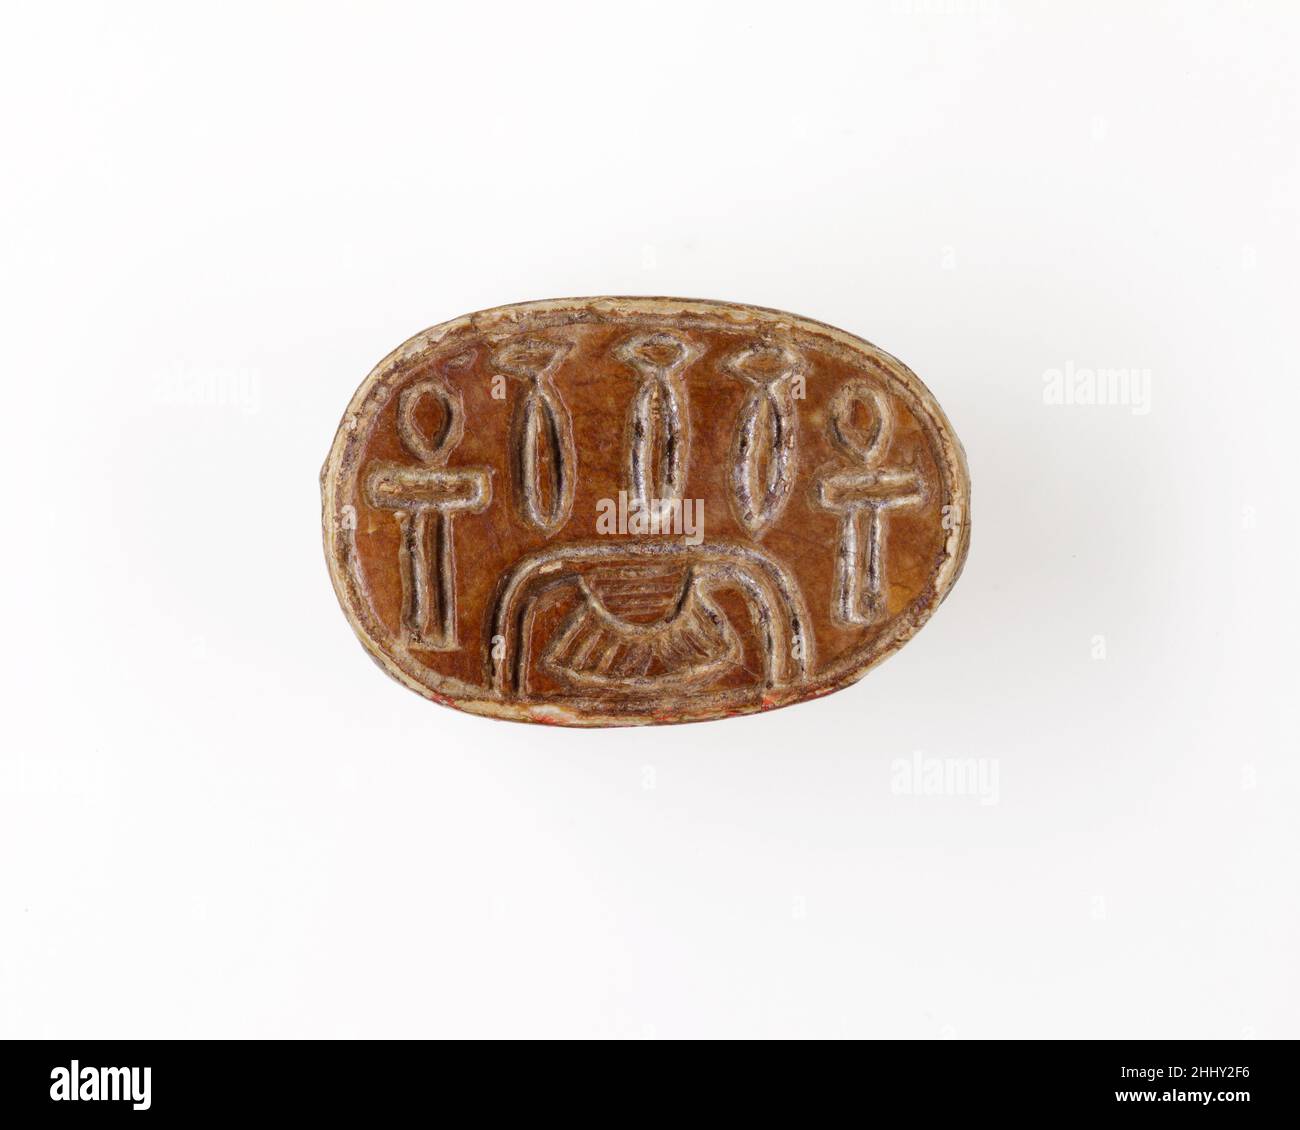 Scarab Inscribed with Hieroglyphs ca. 1850–1640 B.C. Middle Kingdom The majority of design scarabs of the late Middle Kingdom (late Dynasty 12–Dynasty 13, ca. 1850 –1640 B.C.) are decorated with symmetric compositions of hieroglyphs and/or scrolls. These signs are not meant to form words but are chosen for their positive, protective meaning. This scarab shows the hieroglyph for gold (nub) and signs placed above it, in pairs to form a balanced composition.. Scarab Inscribed with Hieroglyphs  557125 Stock Photo